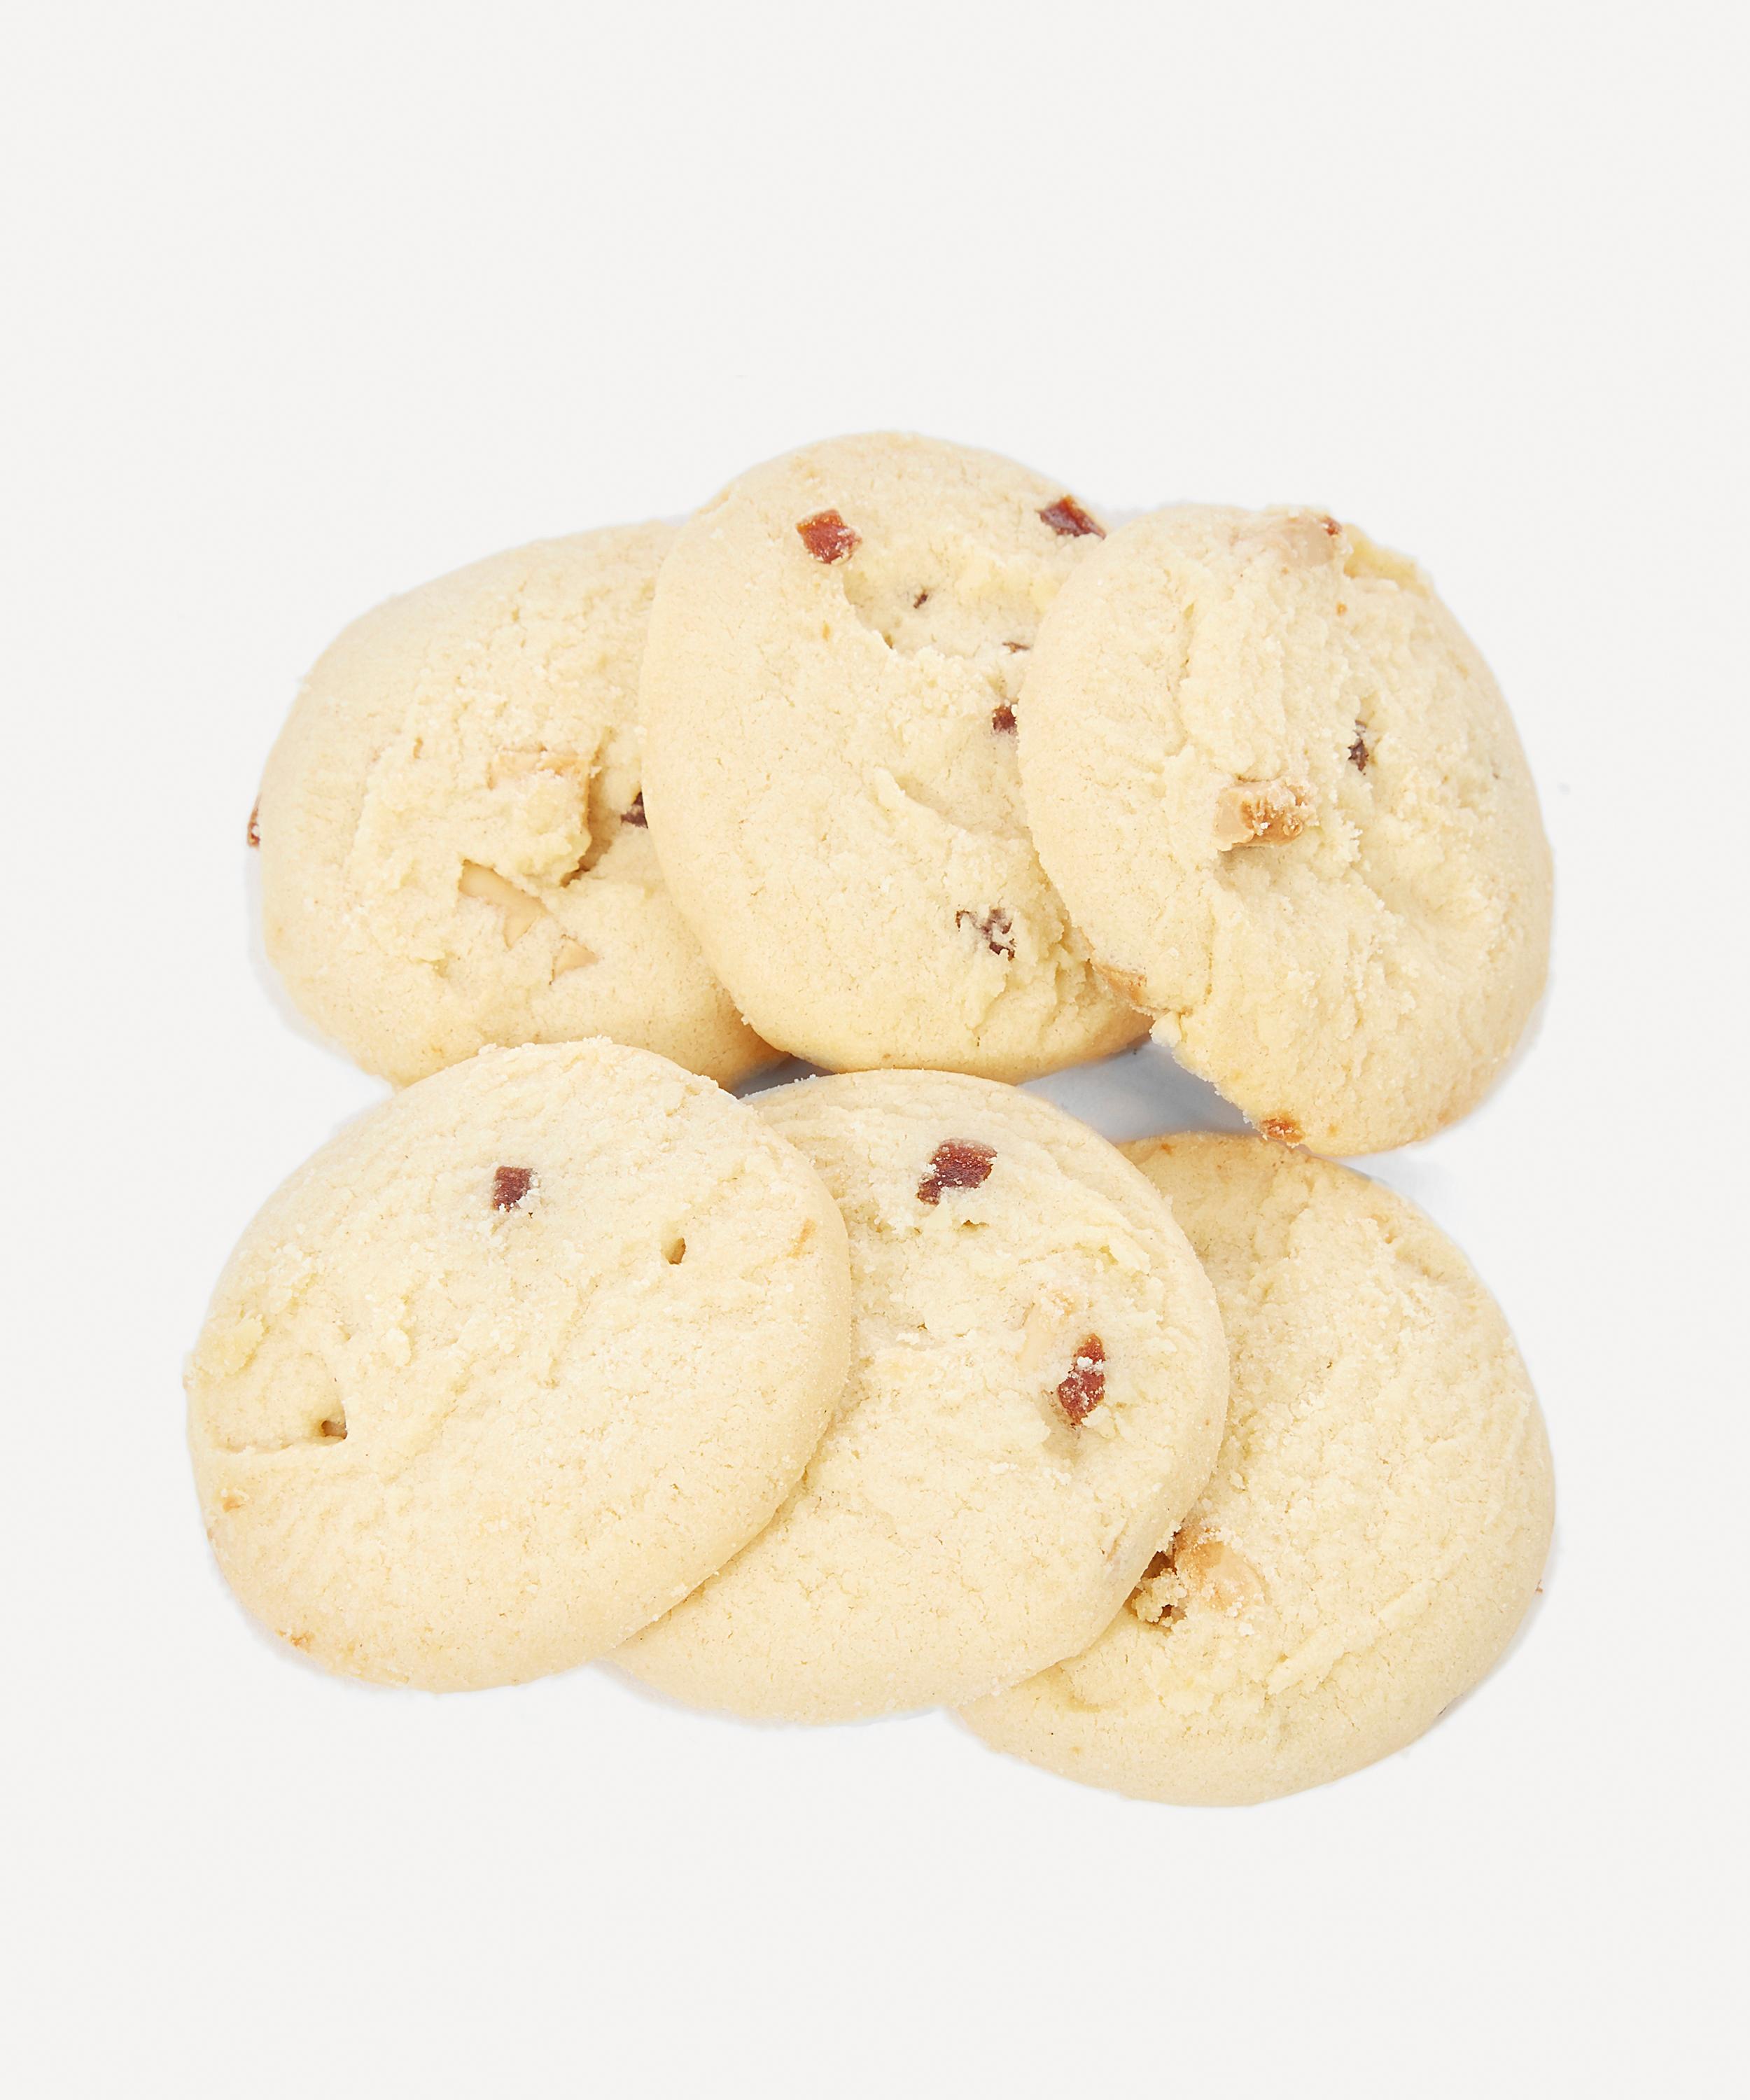 Cartwright Butler Exquisite Strawberry And White Chocolate Chunk Biscuits 0g Liberty